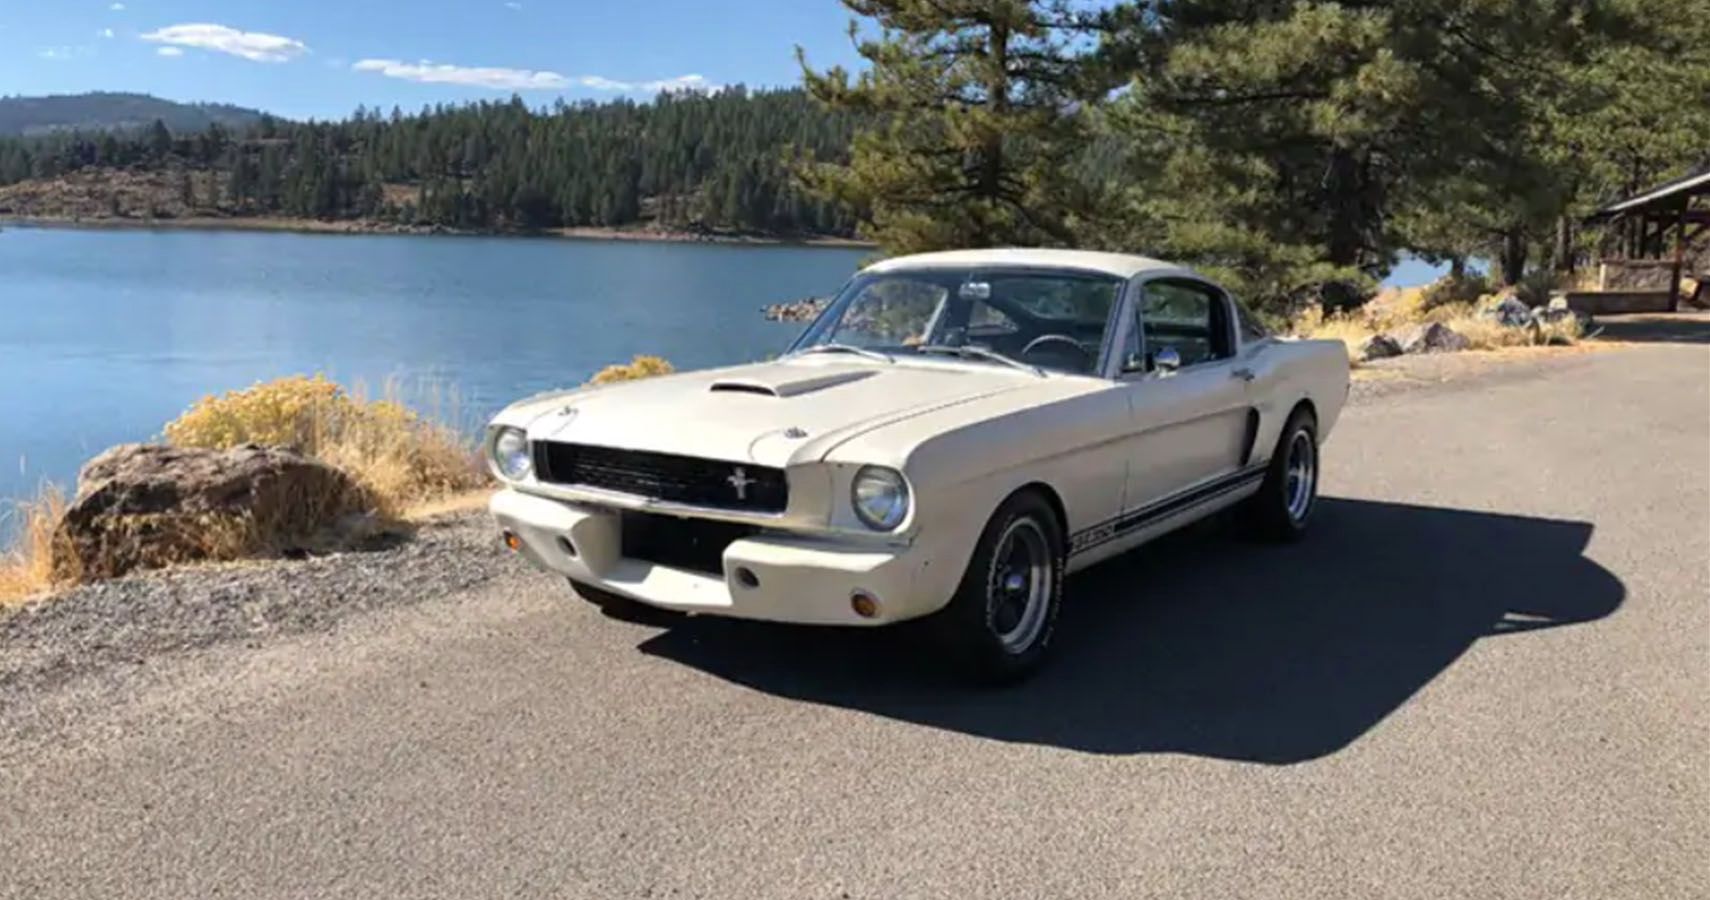 Ford Mustang Shelby GT350 Homemade